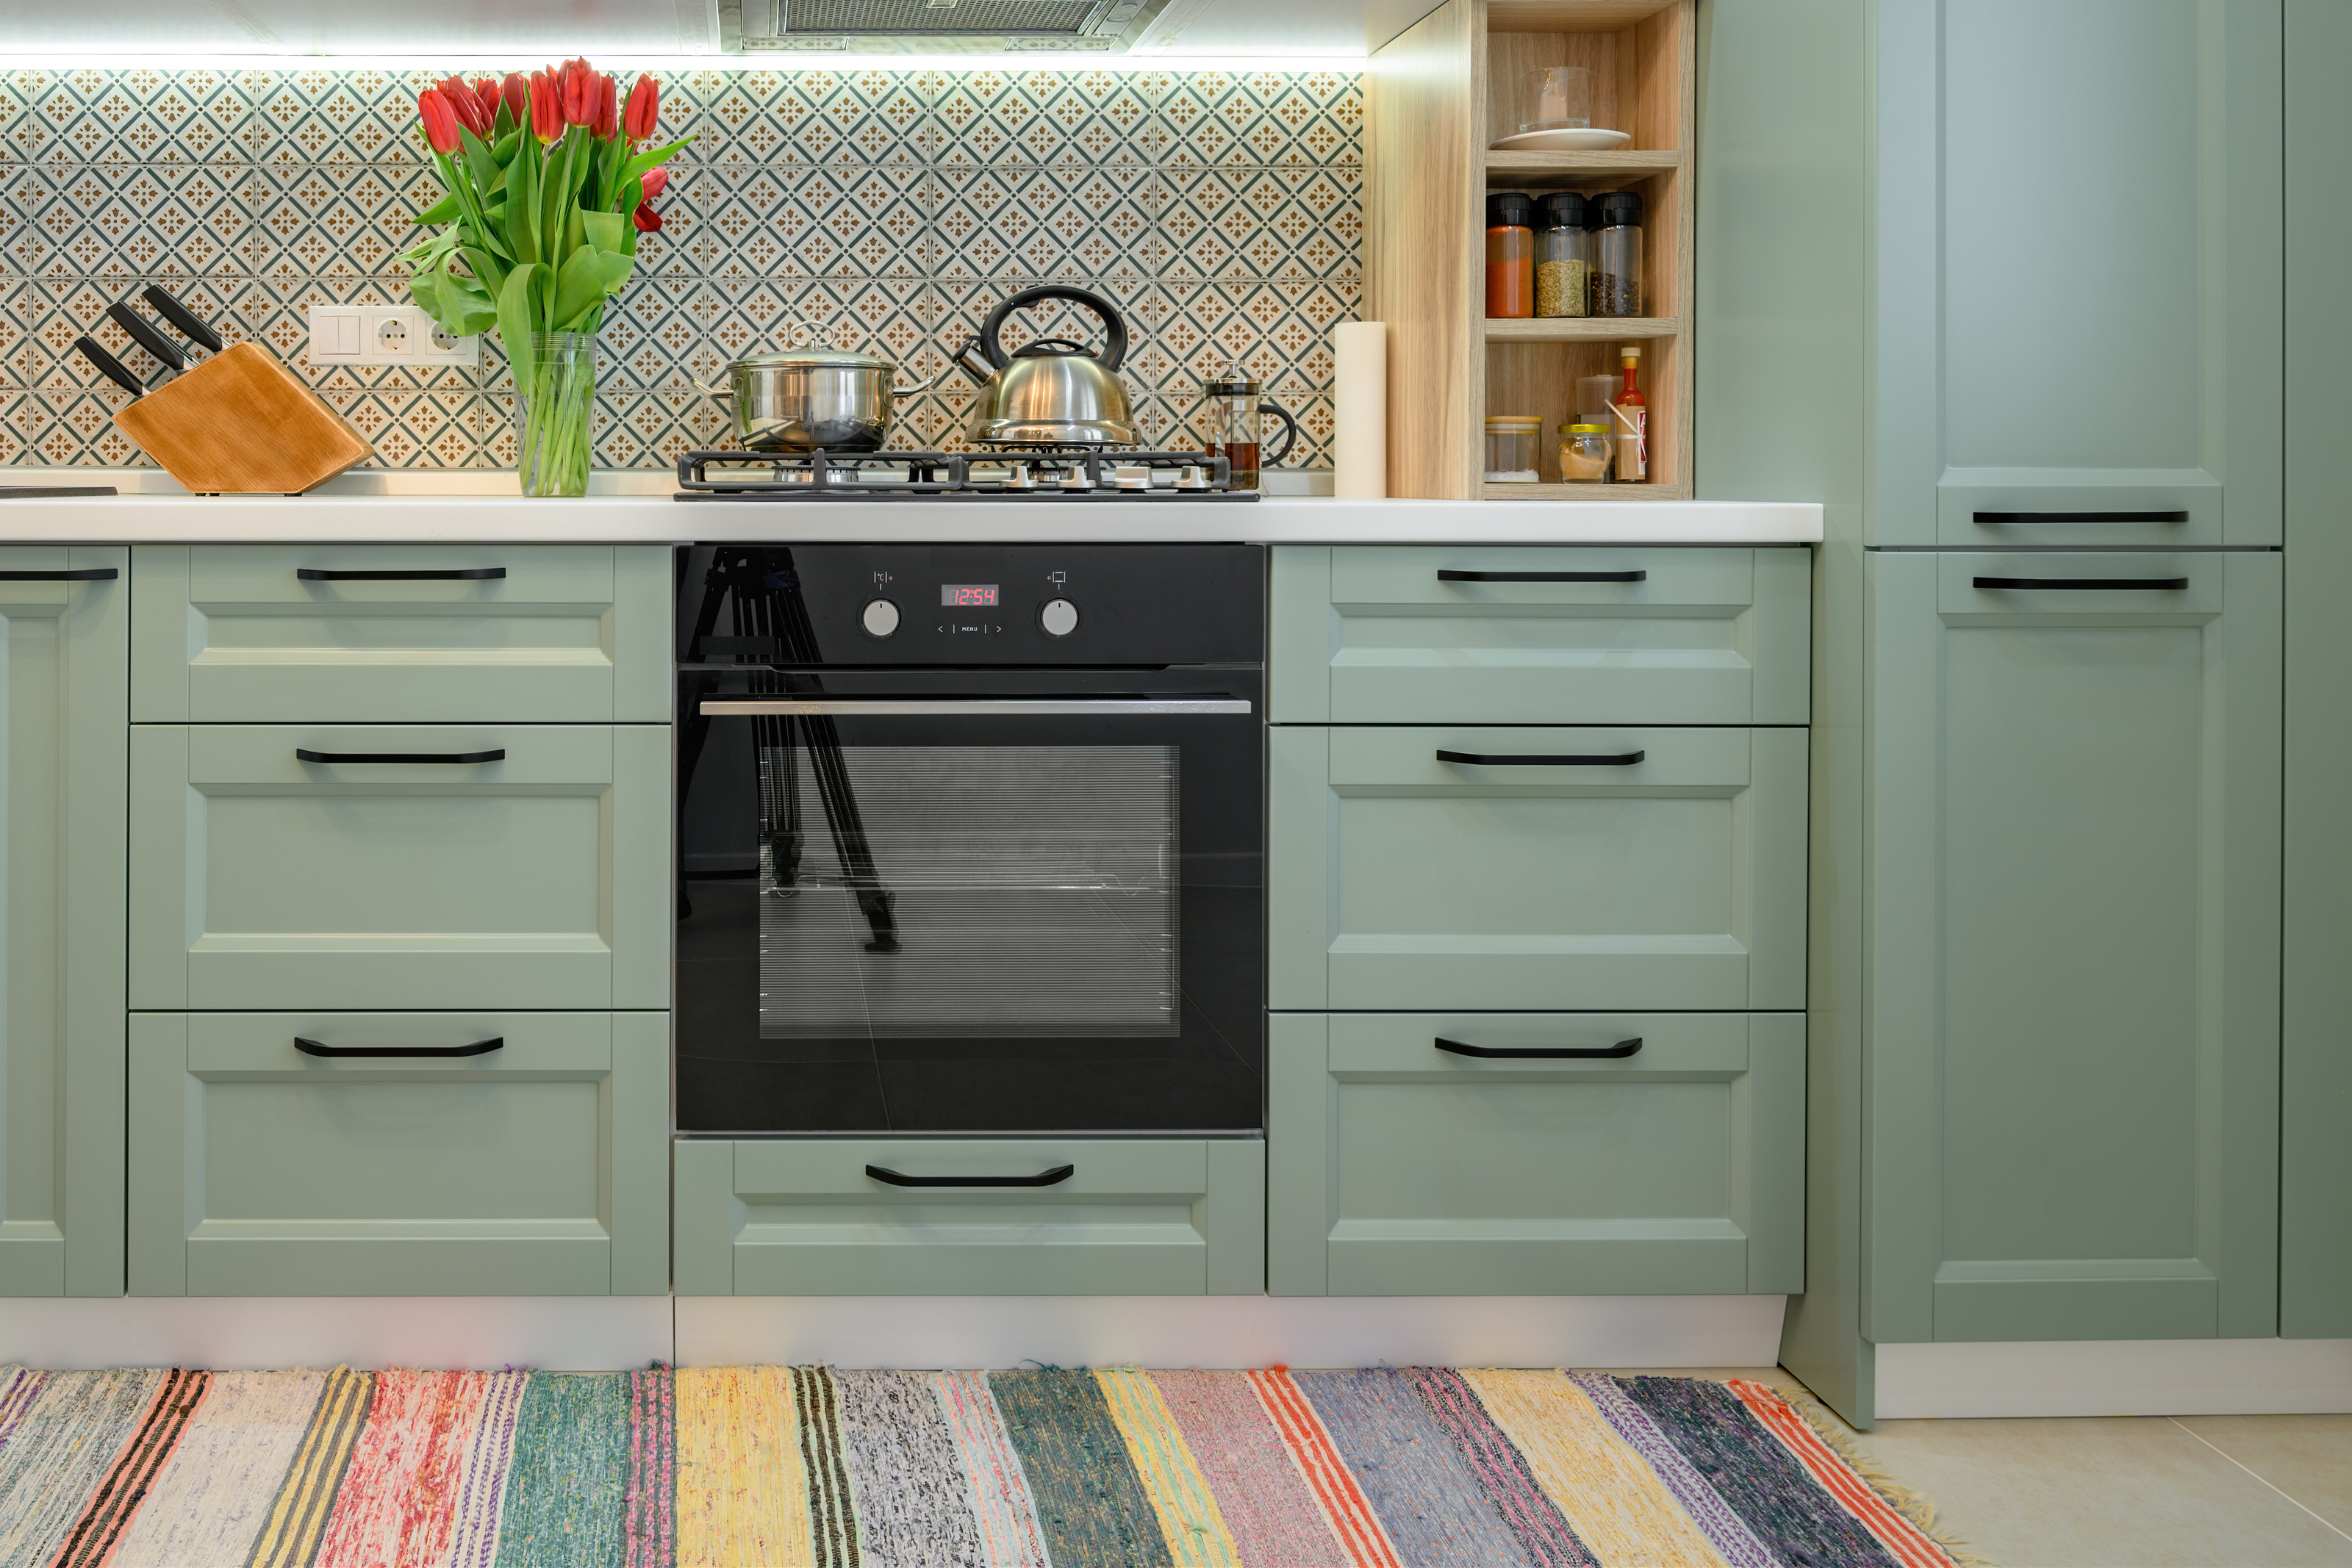 Choose Bold Appliances for a Colorful Kitchen